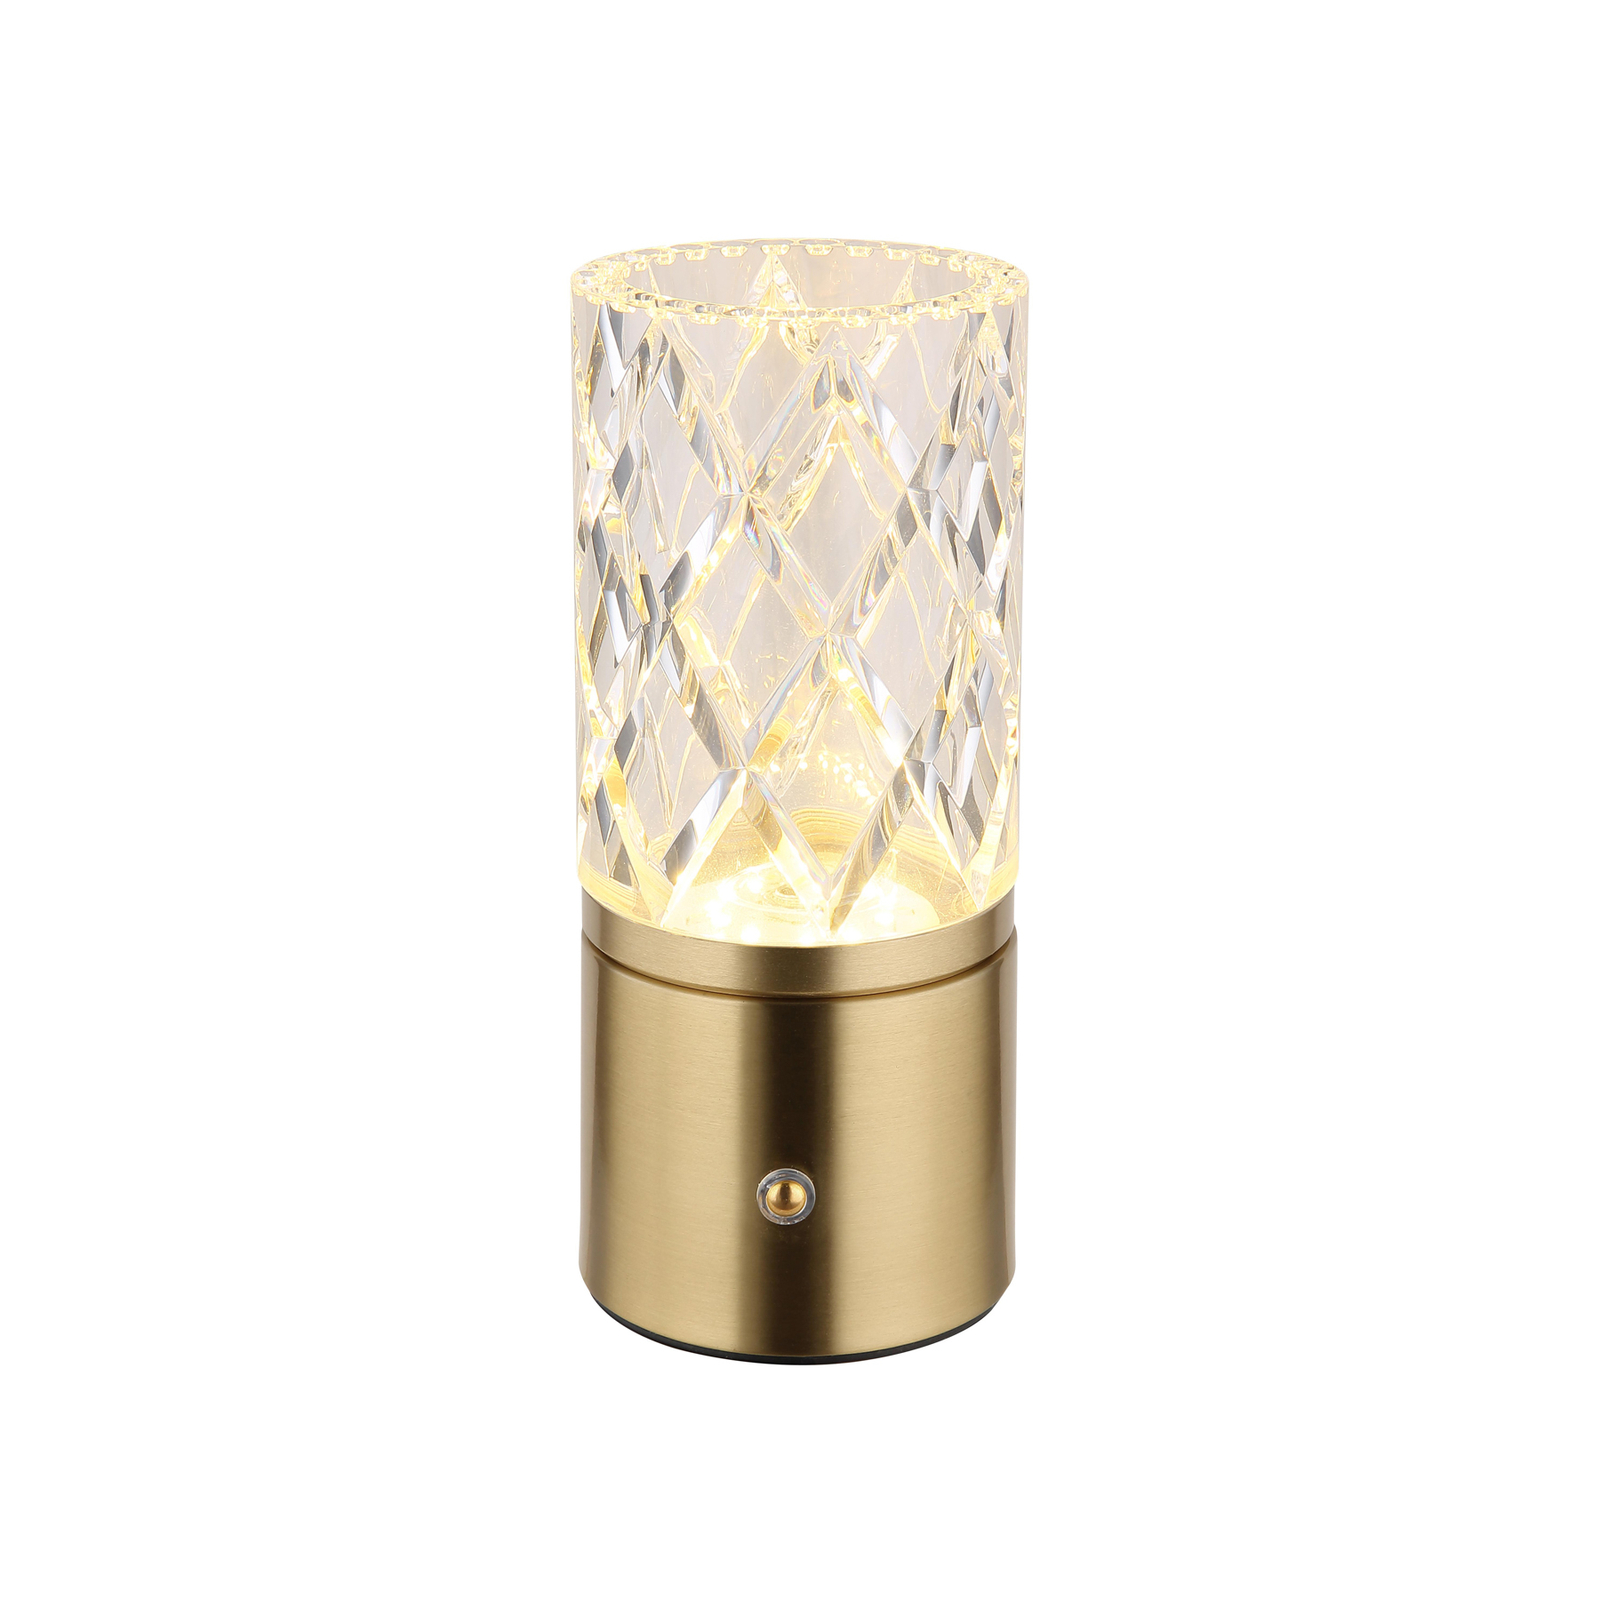 LED table lamp Lunki, brass-coloured, height 19 cm, CCT